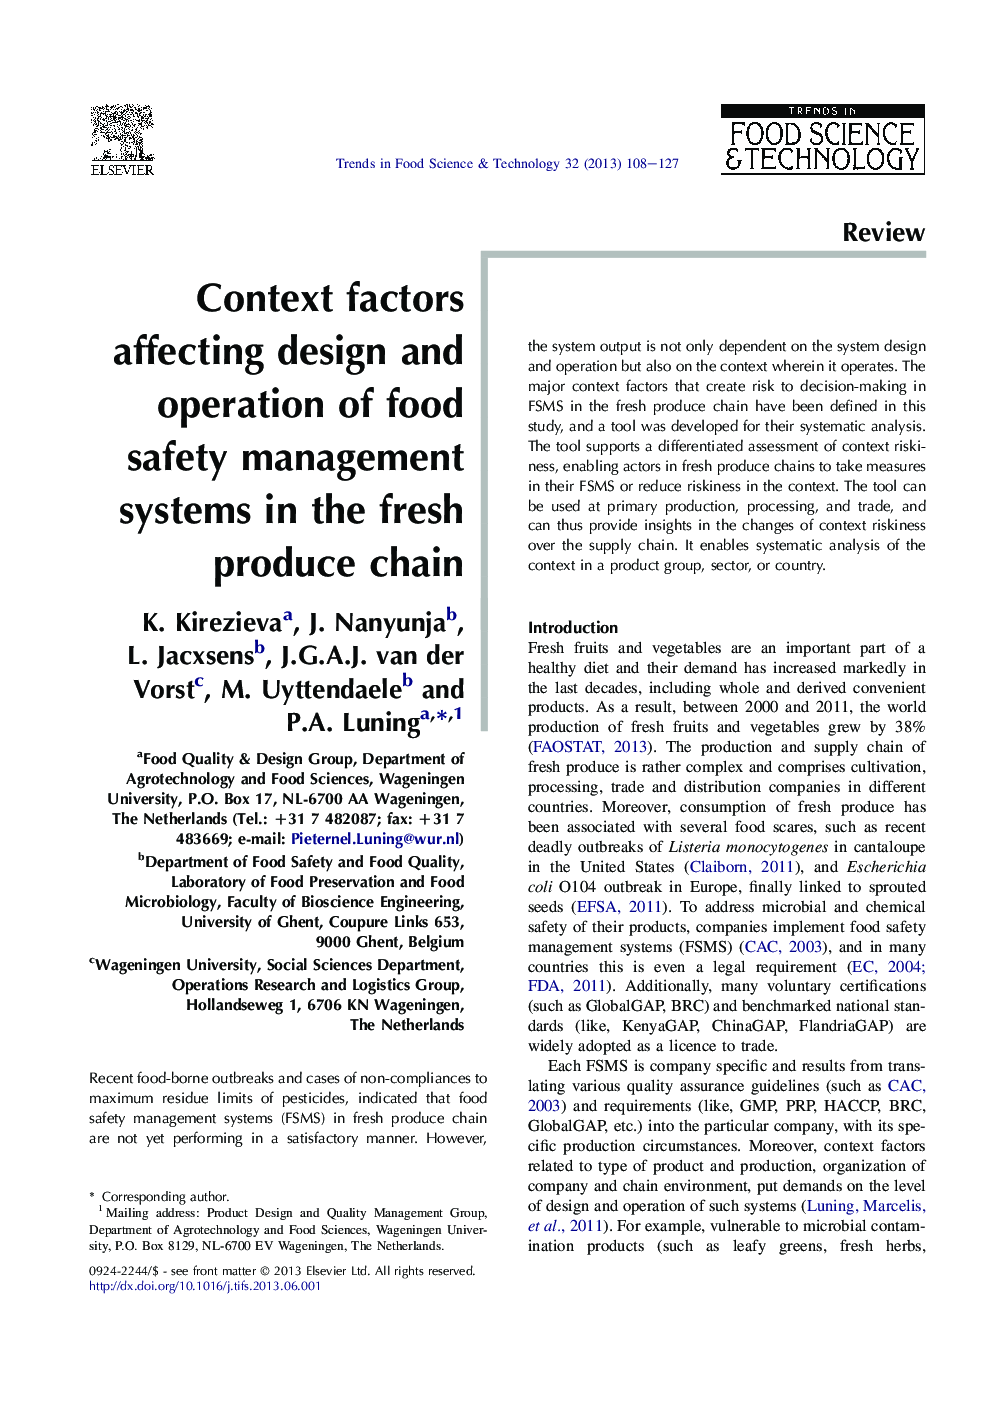 Context factors affecting design and operation of food safety management systems in the fresh produce chain